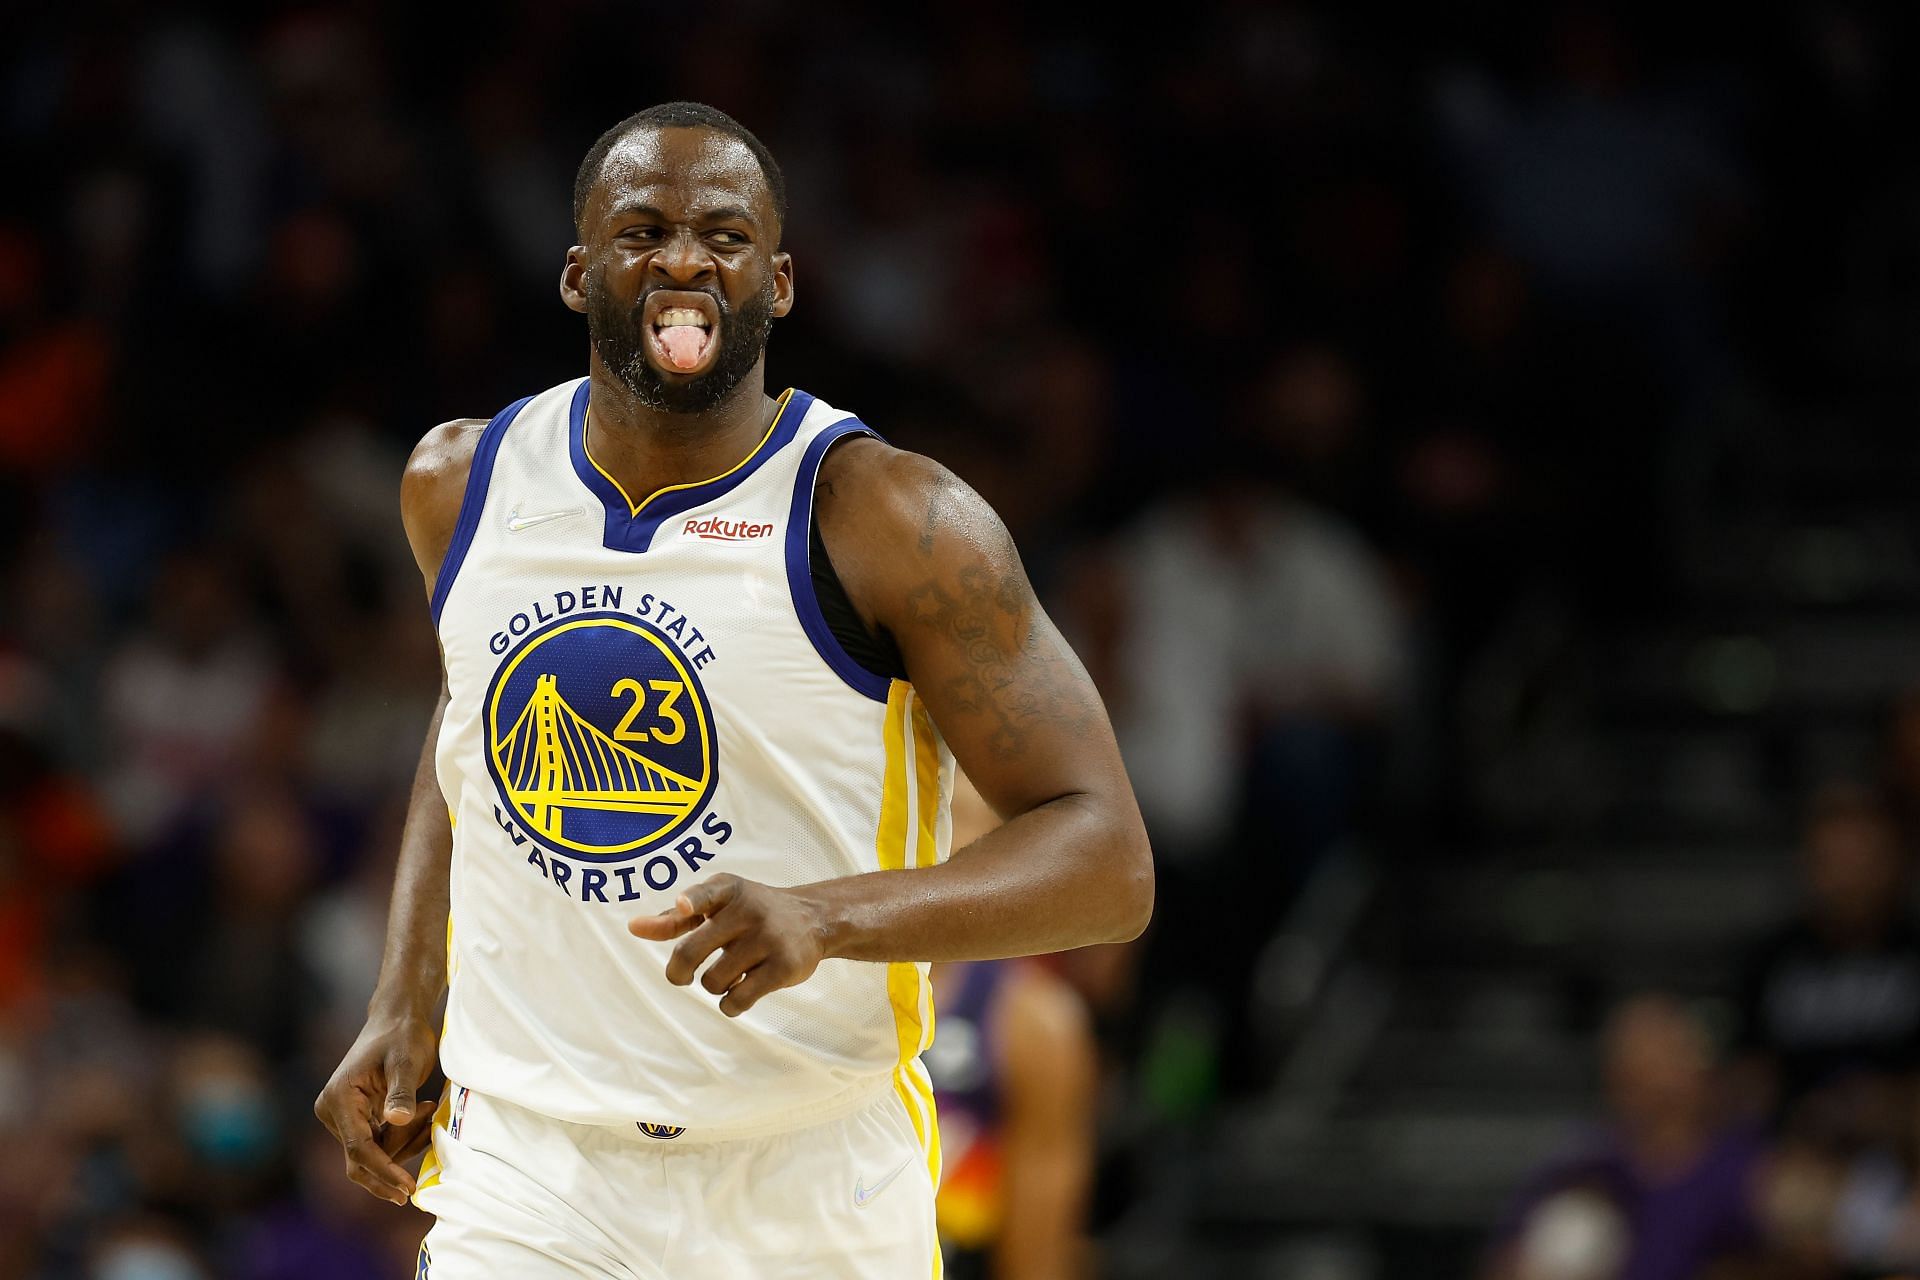 Draymond Green of the Warriors reacts after a three-point shot against the Phoenix Suns